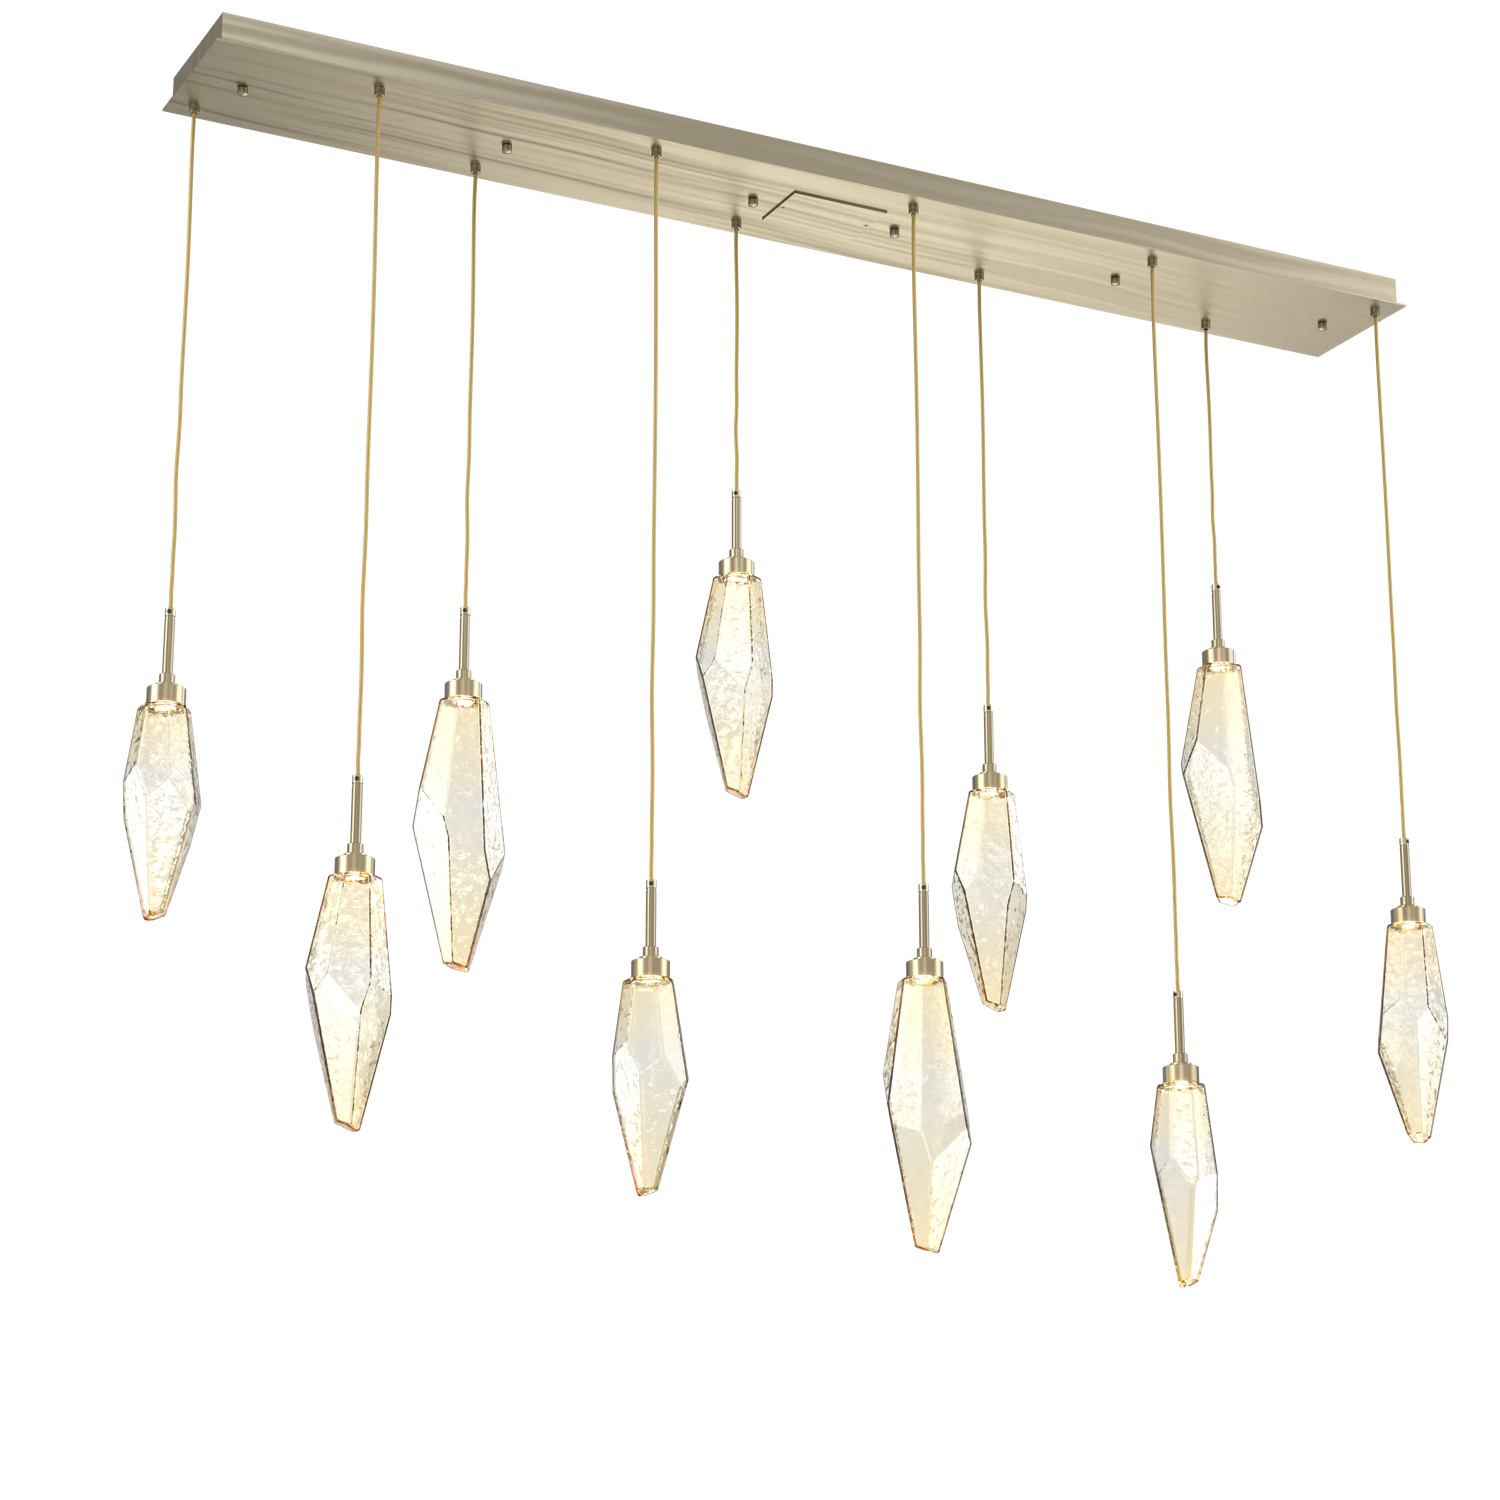 PLB0050-10-HB-CA-Hammerton-Studio-Rock-Crystal-10-light-linear-pendant-chandelier-with-heritage-brass-finish-and-chilled-amber-blown-glass-shades-and-LED-lamping